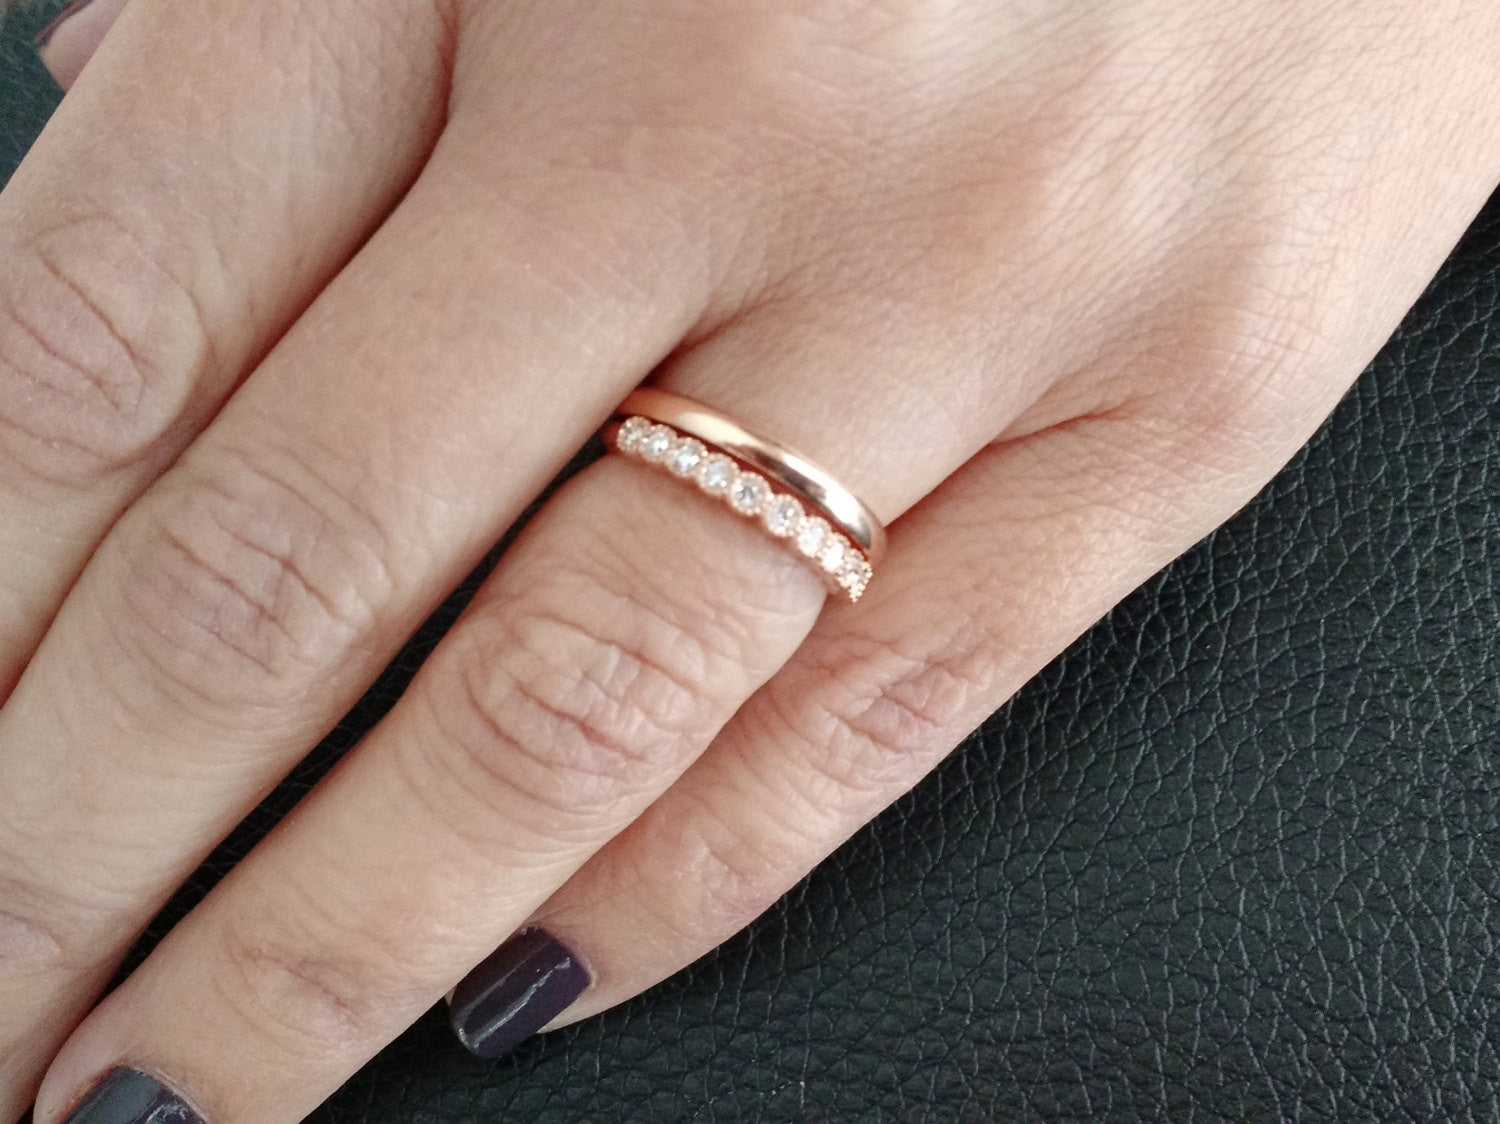 Wedding Band, Eternity, Stackable Ring in14k Rose,  White or Yellow Gold - M2015WB